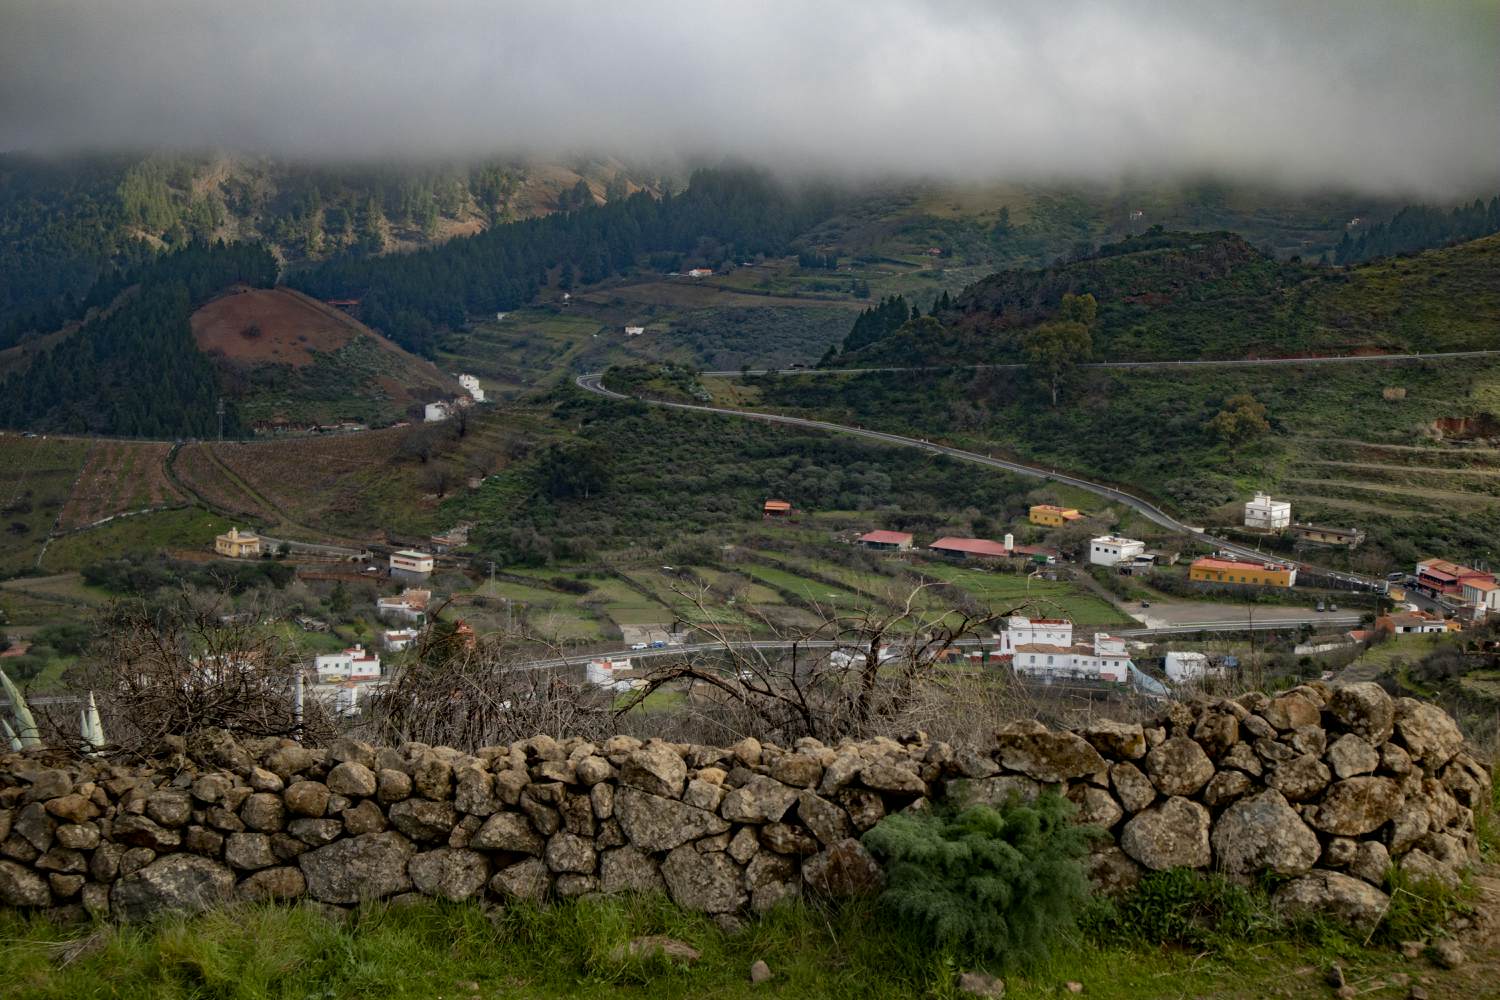 View of the hamlet of Cueva Grande from the viewing plateau behind the stone wall